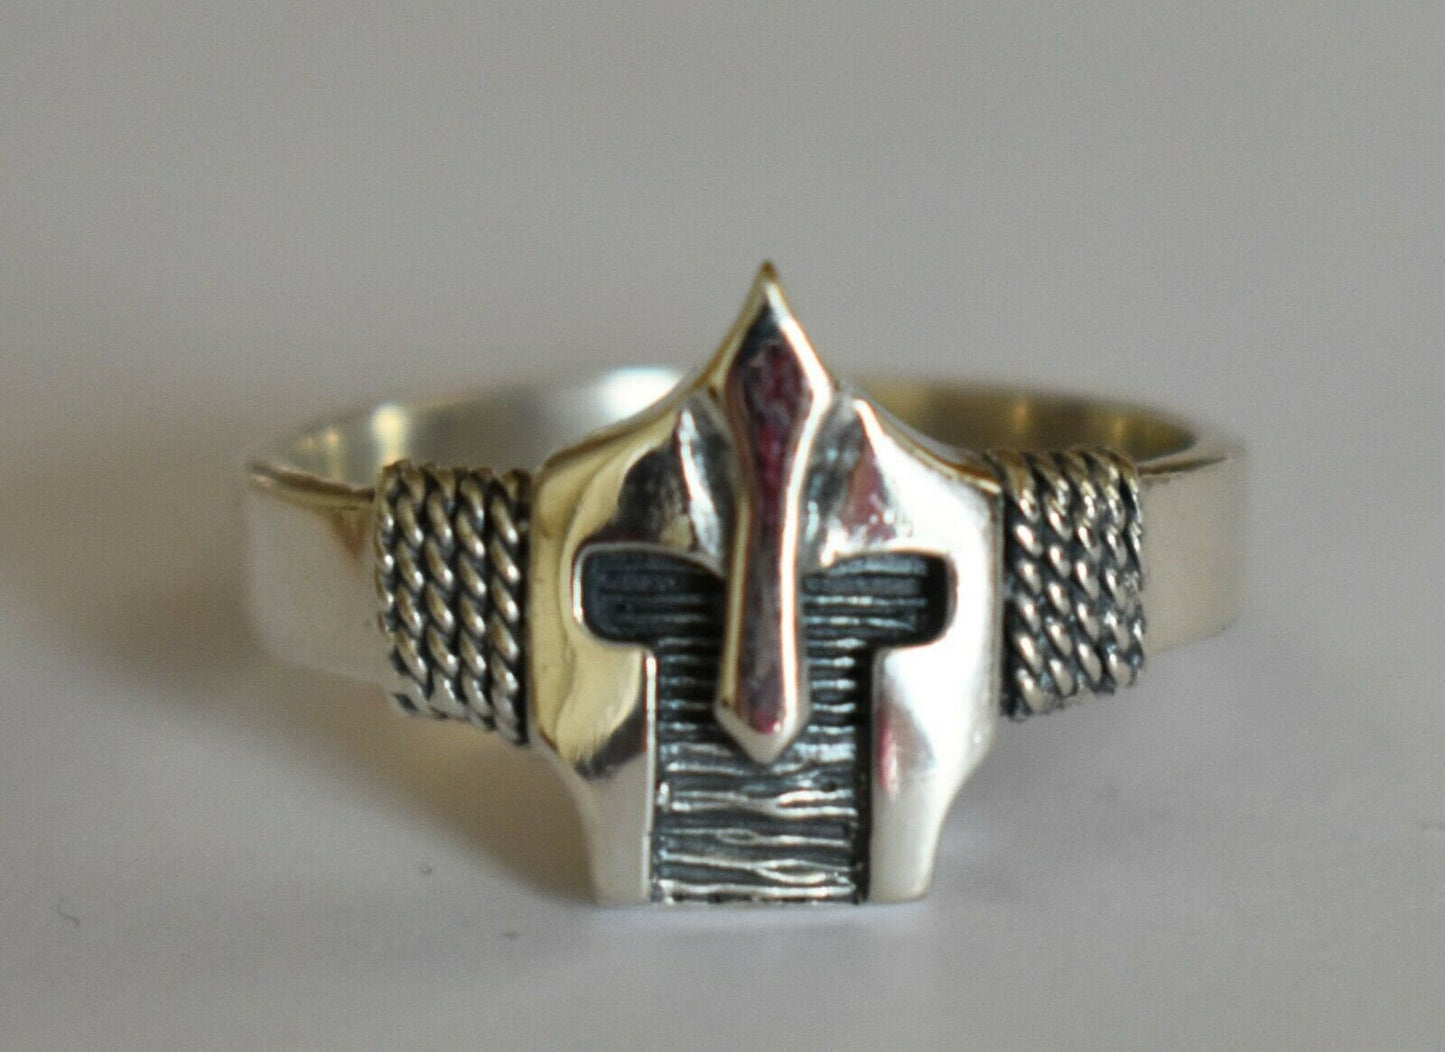 Spartan Helmet - King Leonidas - 300 Spartans - Battle of Thermopylae - 480 BC - Ring - Size Us 12- 925 Sterling Silver